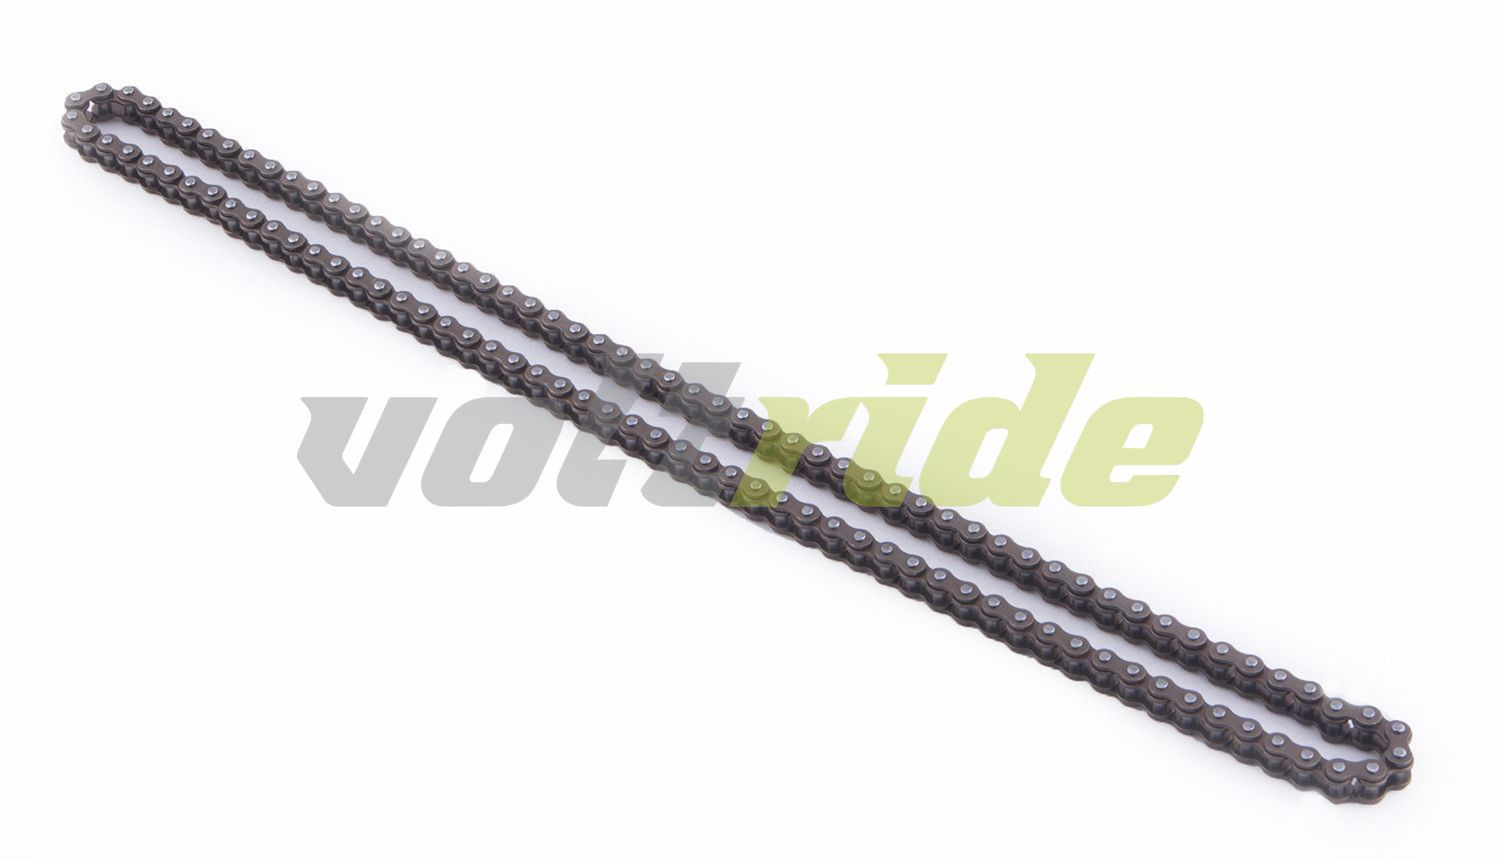 SXT Thin chain with 55 link - type 25H